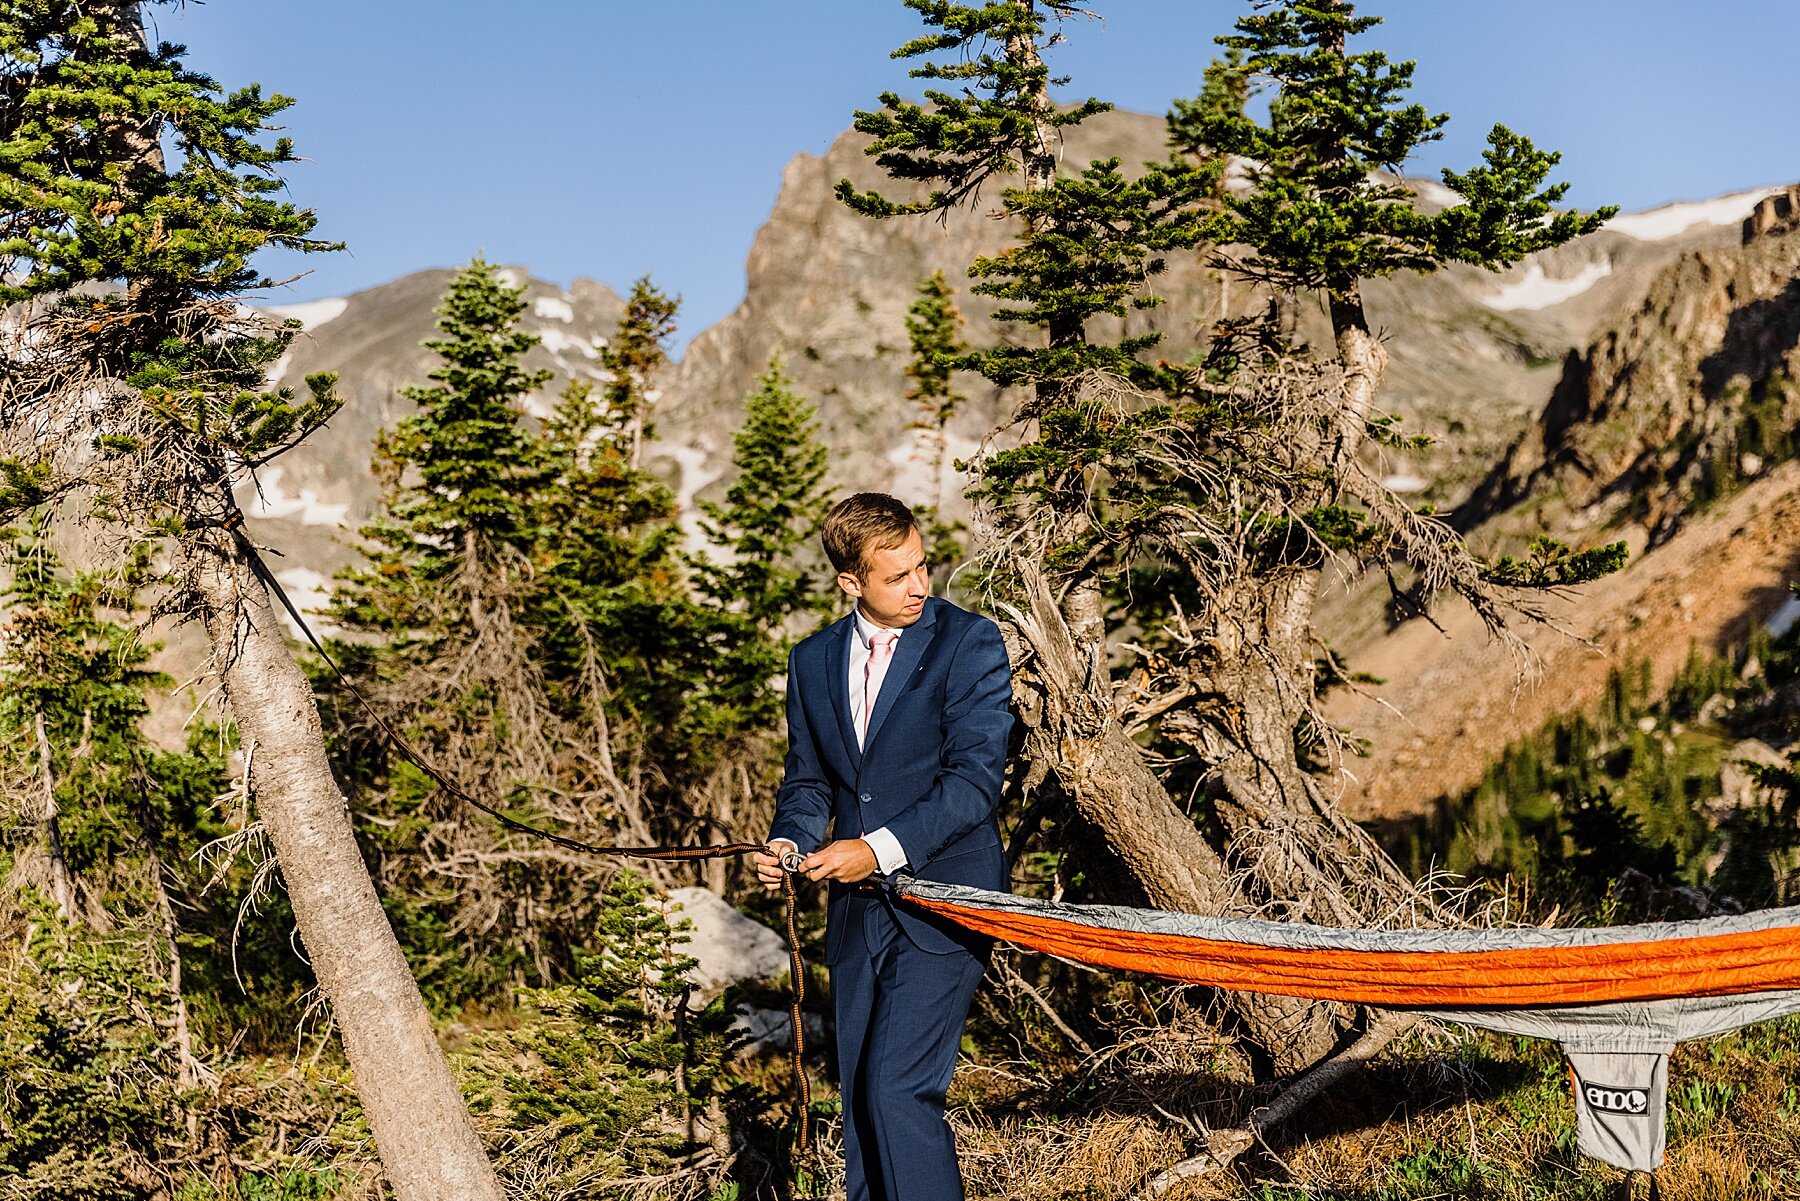 Colorado Elopement at Lake Isabelle in Indian Peaks Wilderness